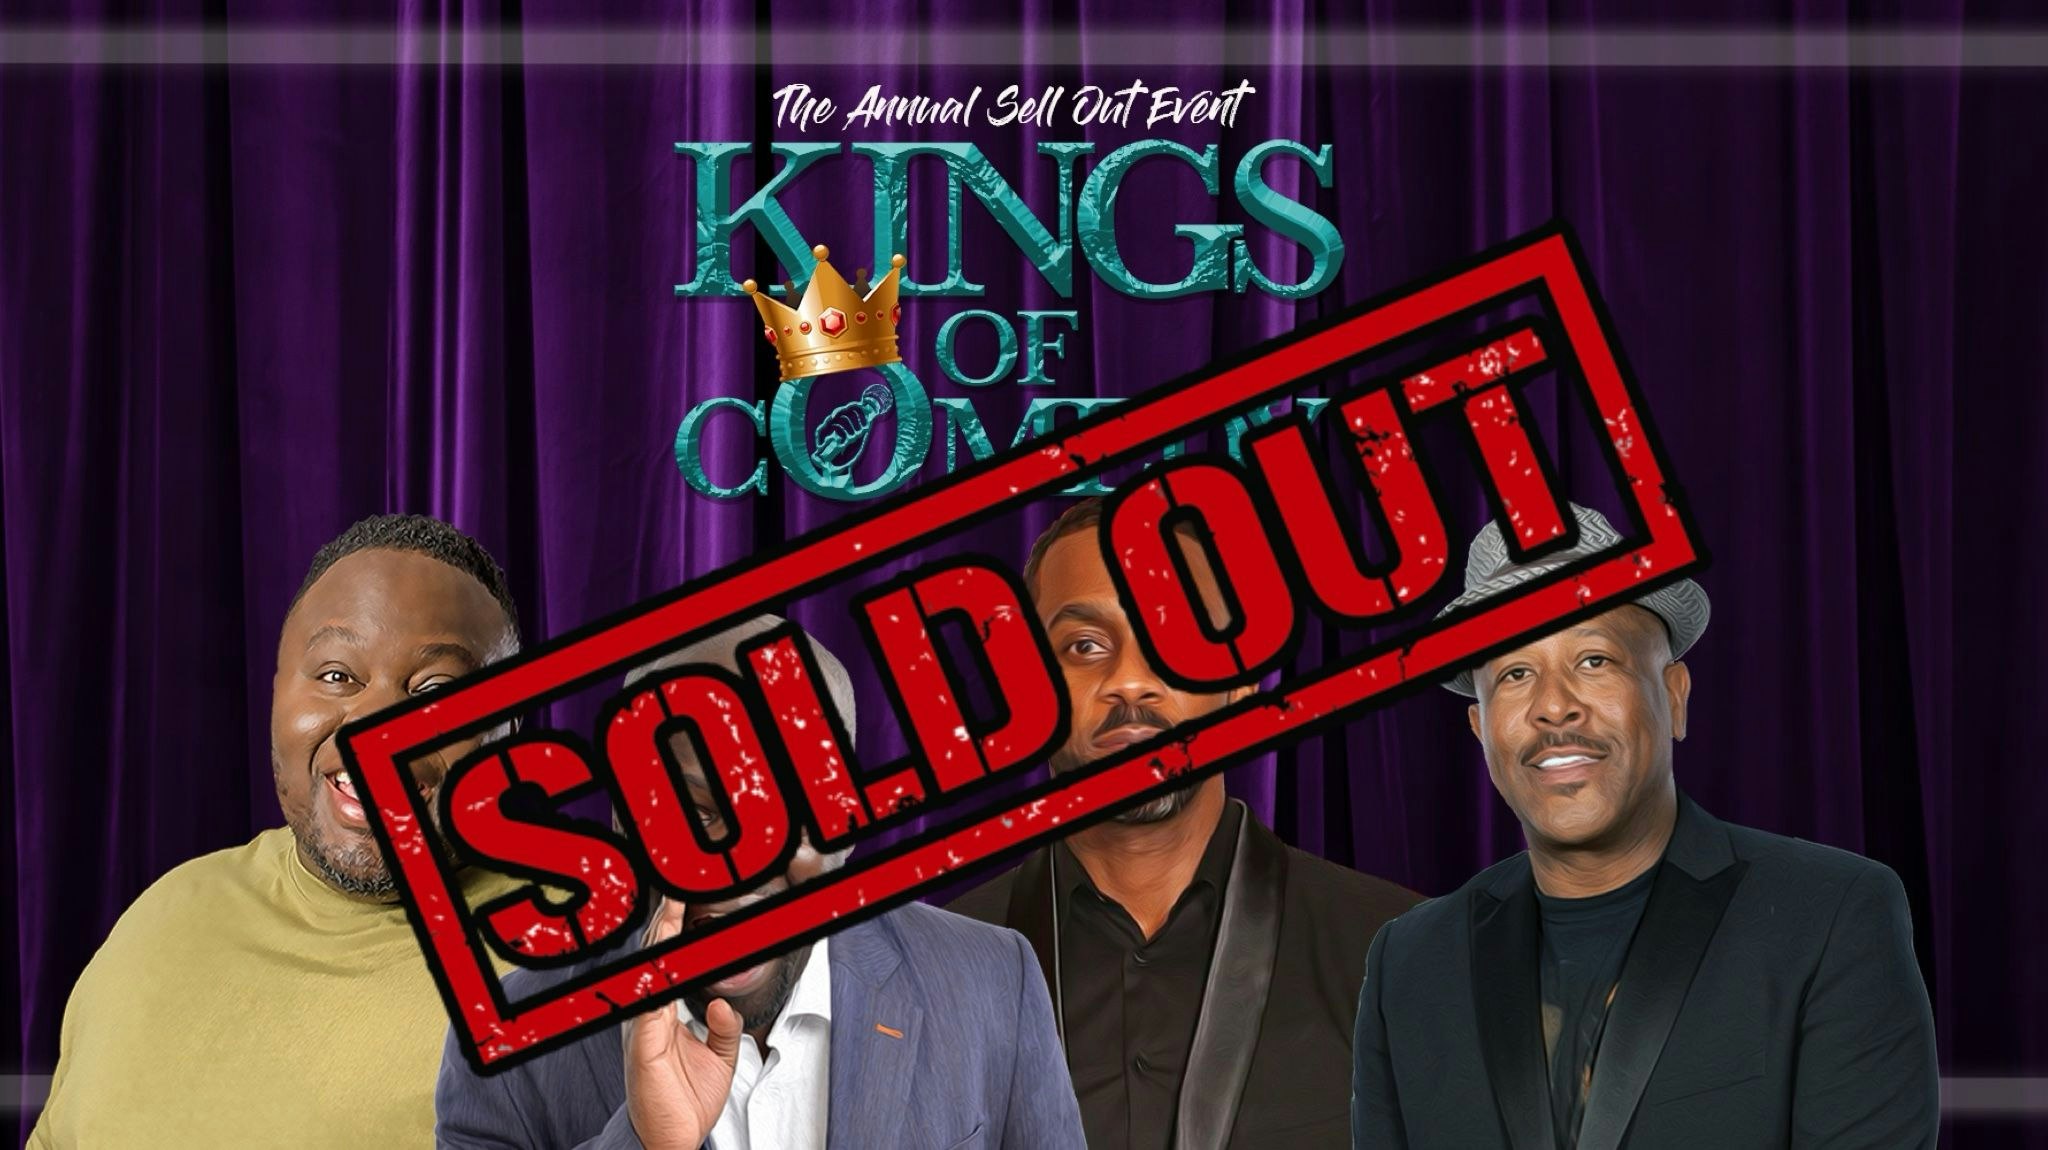 COBO : Kings Of Comedy  – Bilston / Wolverhampton ** SOLD OUT – Join Waiting List Or Buy For Birmingham **